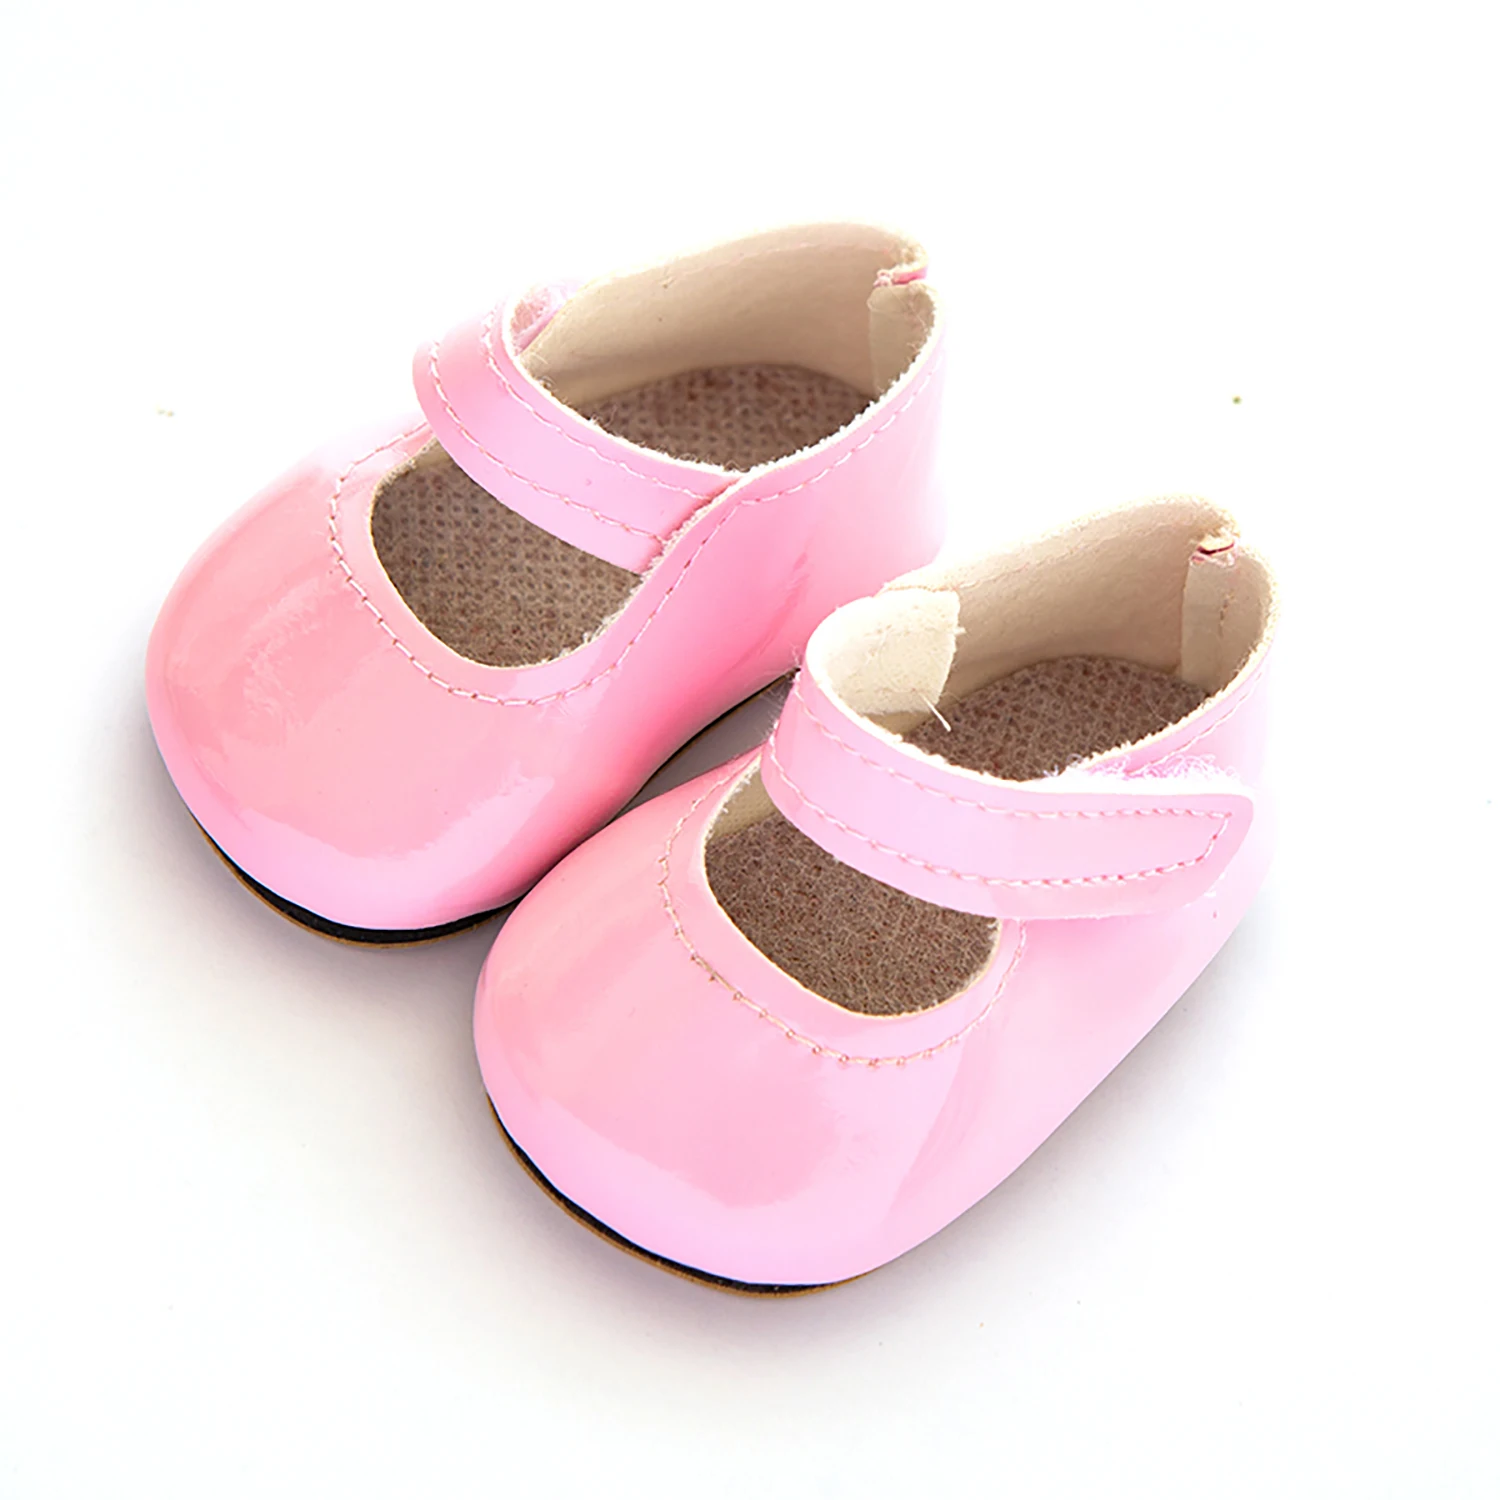 2021 New New Baby Born Fit 18 inch American Girl Doll Shoes Accessories Solid Color Shoes For Baby Birthday Gift